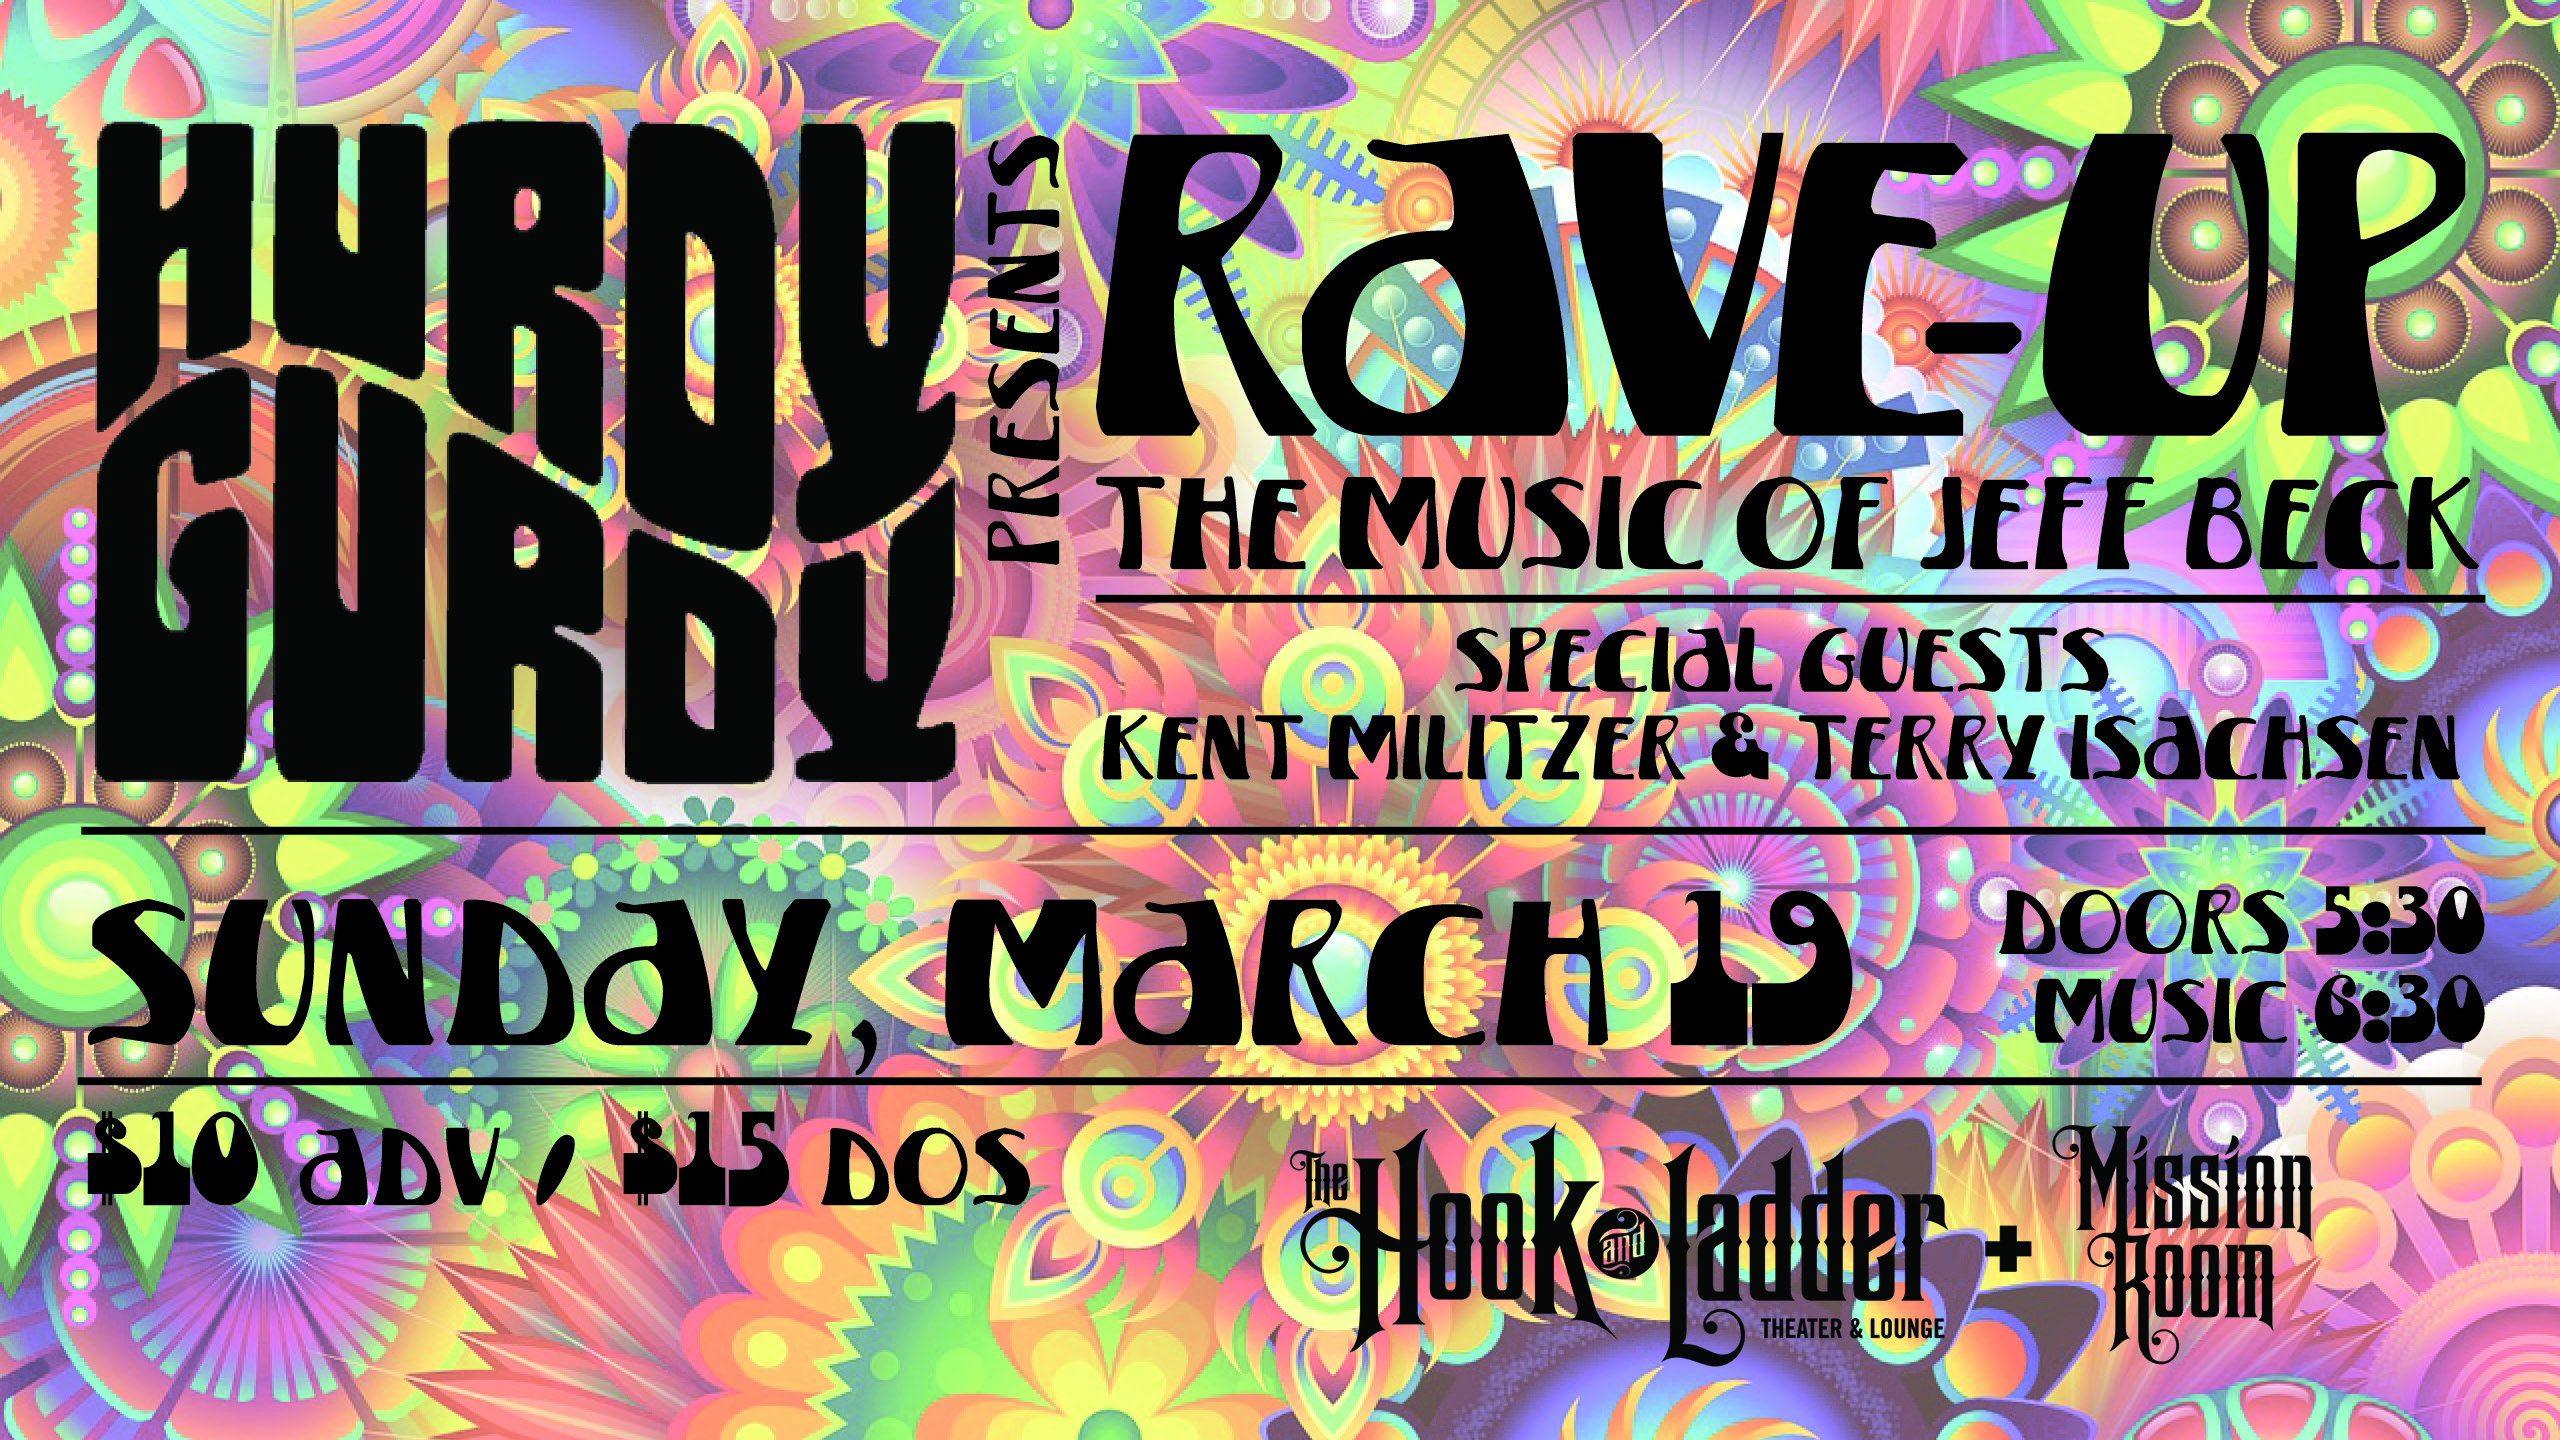 Hurdy Gurdy Presents Rave-Up The Music of Jeff Beck Sunday, March 19, 2023 The Mission Room Doors 5:30pm :: Music 6:30pm :: 21+ General Admission * $10 ADV / $15 DOS